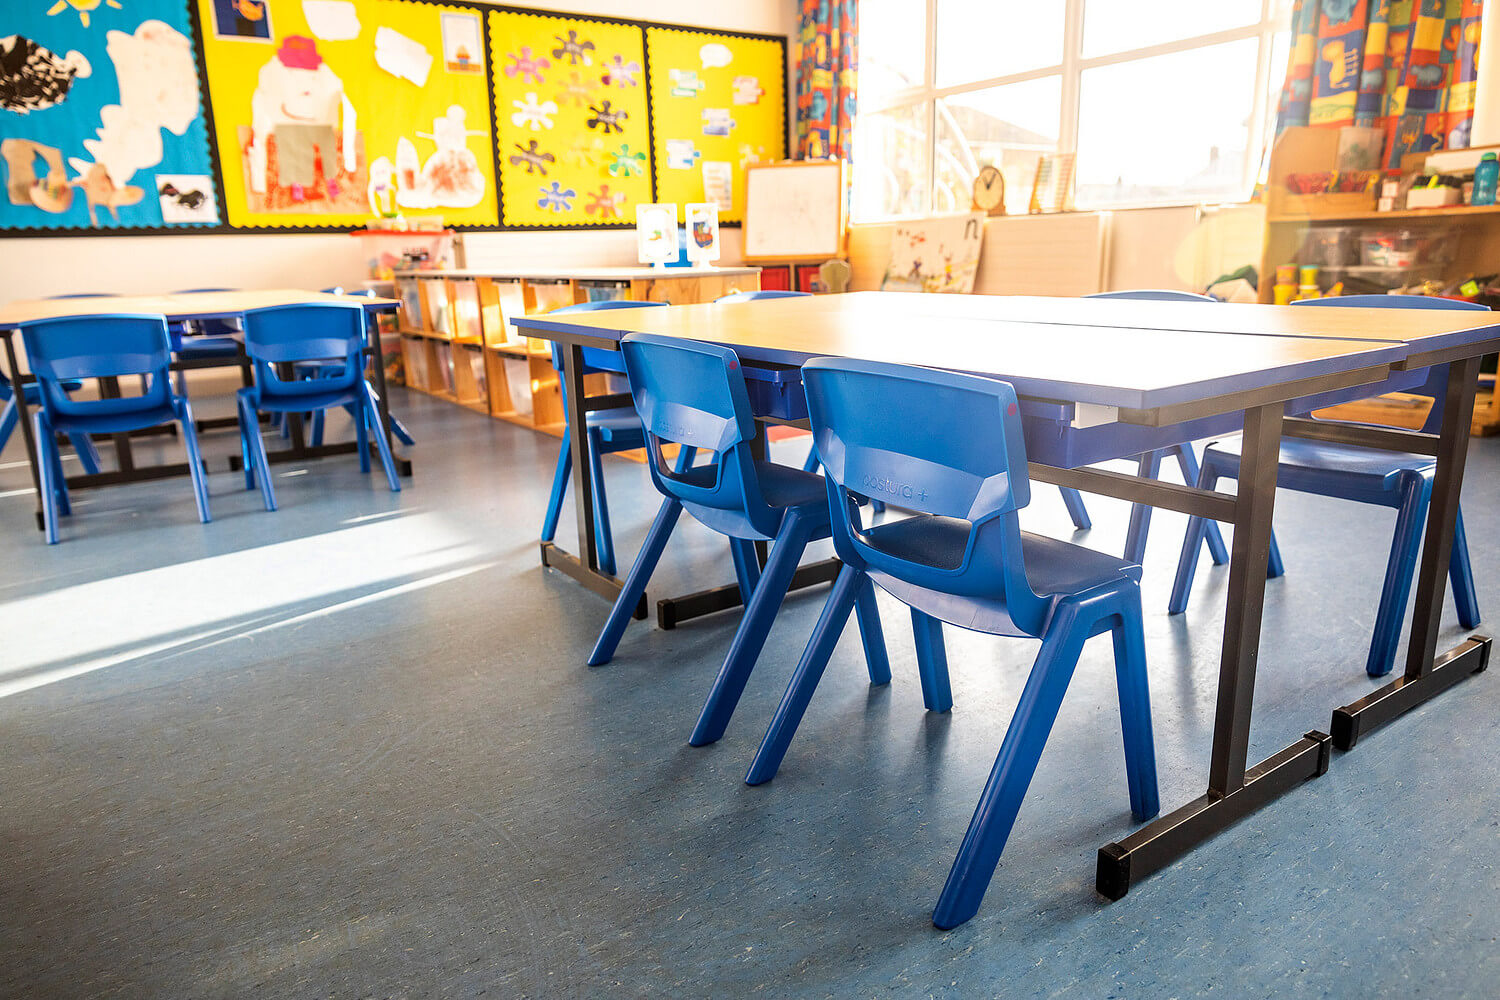 Photo of a classroom at Victoria Primary School with plastic school chairs and tables